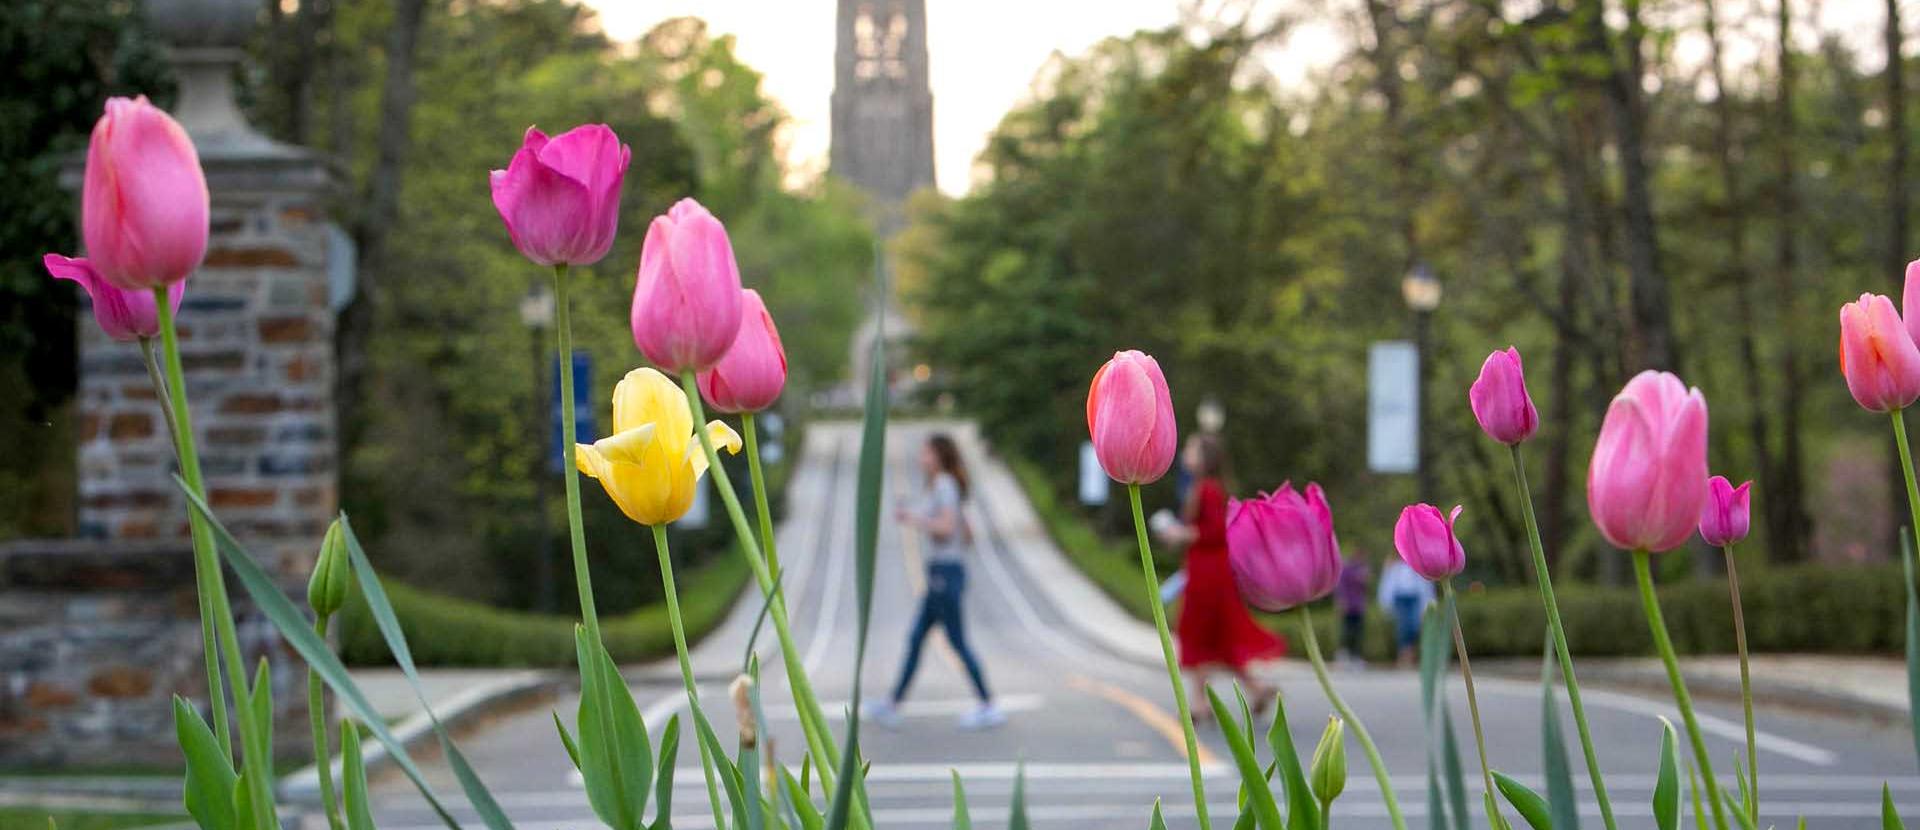 Pink and yellow tulips in the foreground with Duke Tower and road in the background centered.